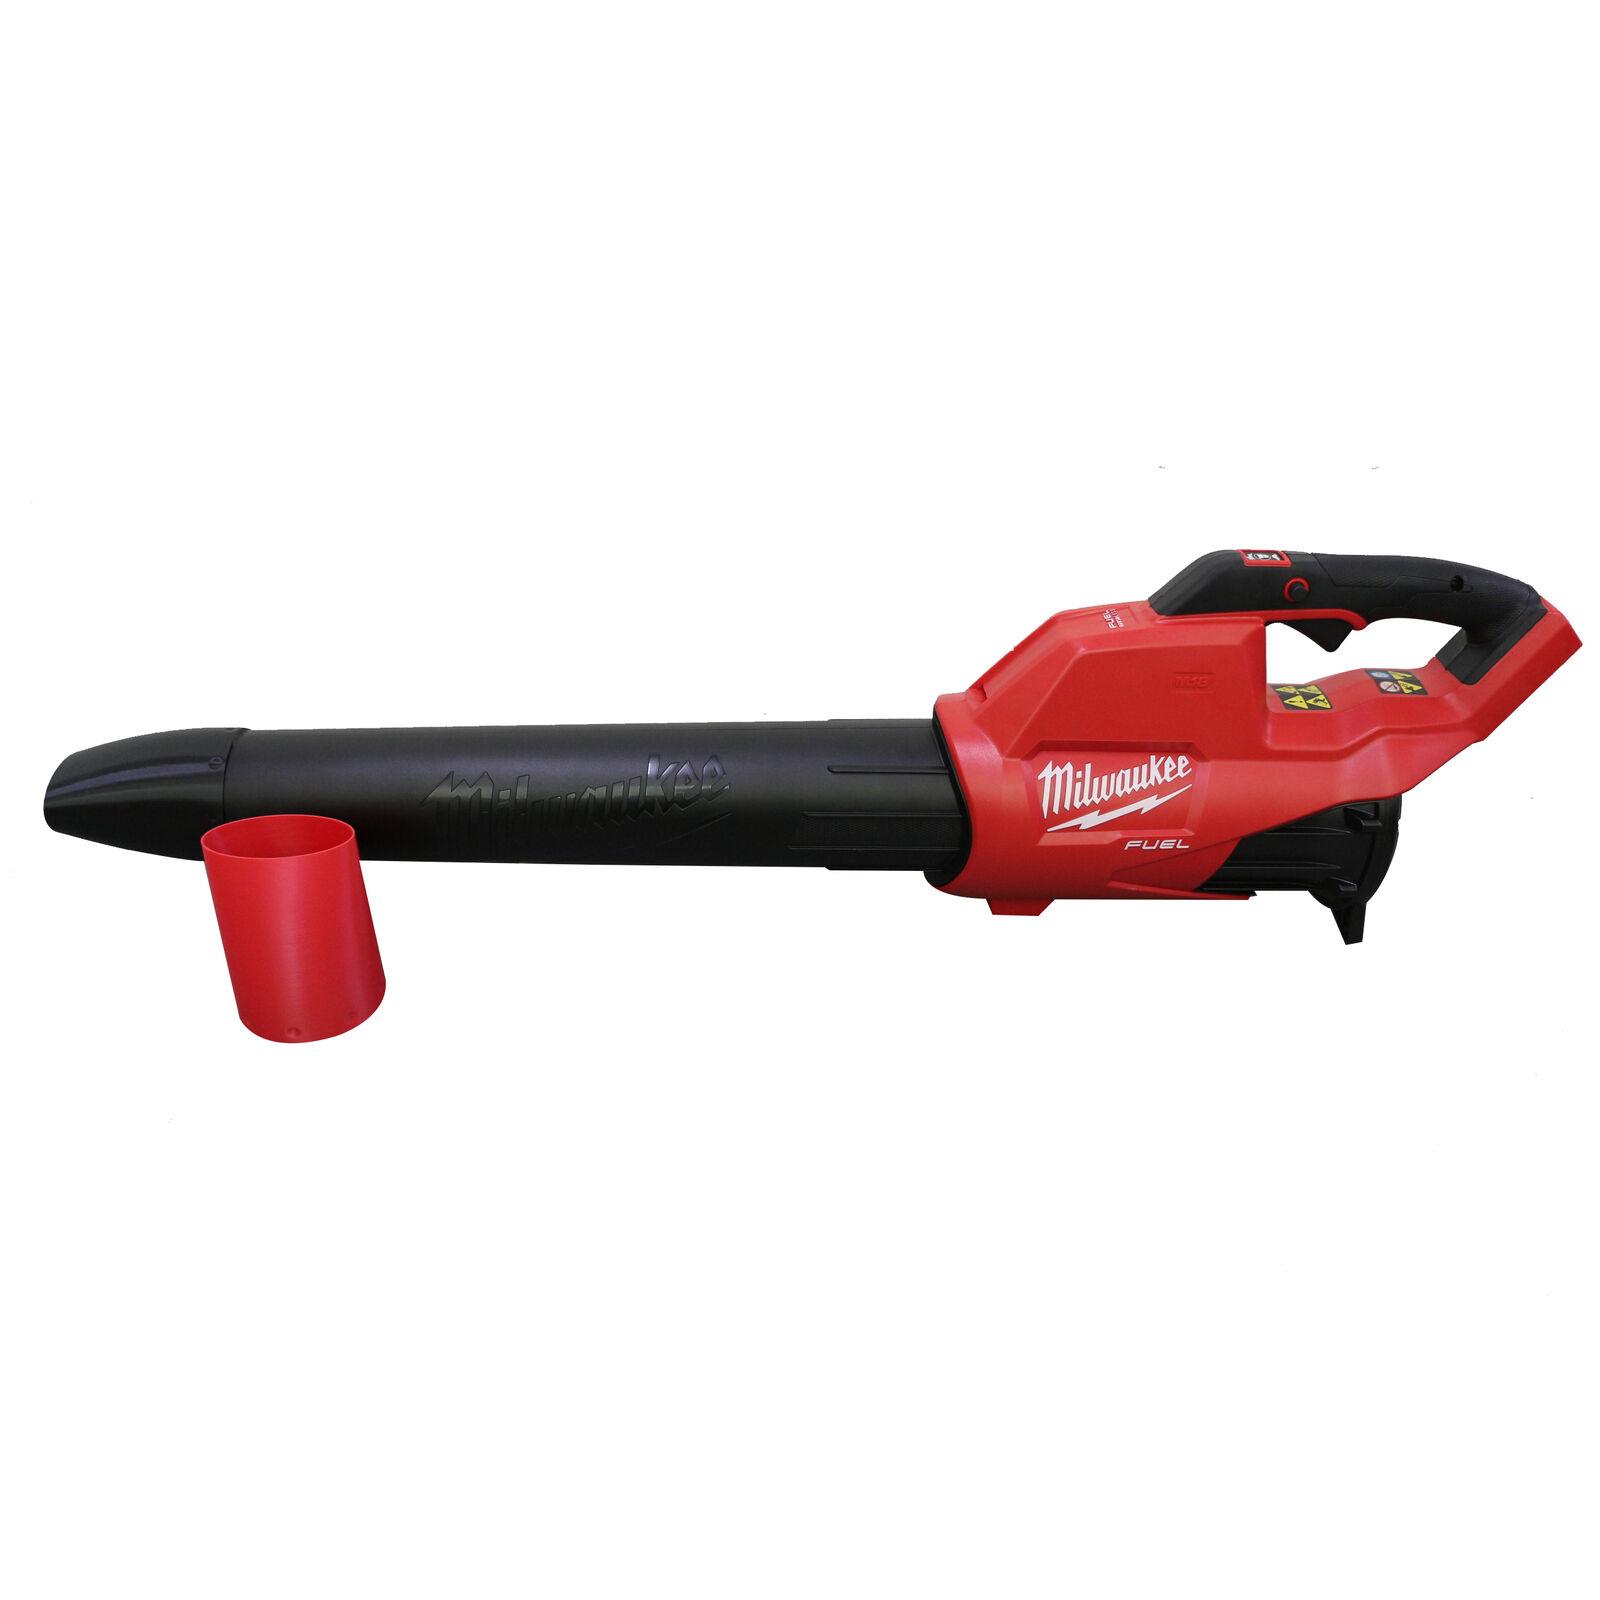 New Milwaukee M18 Fuel Leaf Blower Flaring Nozzle, Tip-2724-20, 2728-20